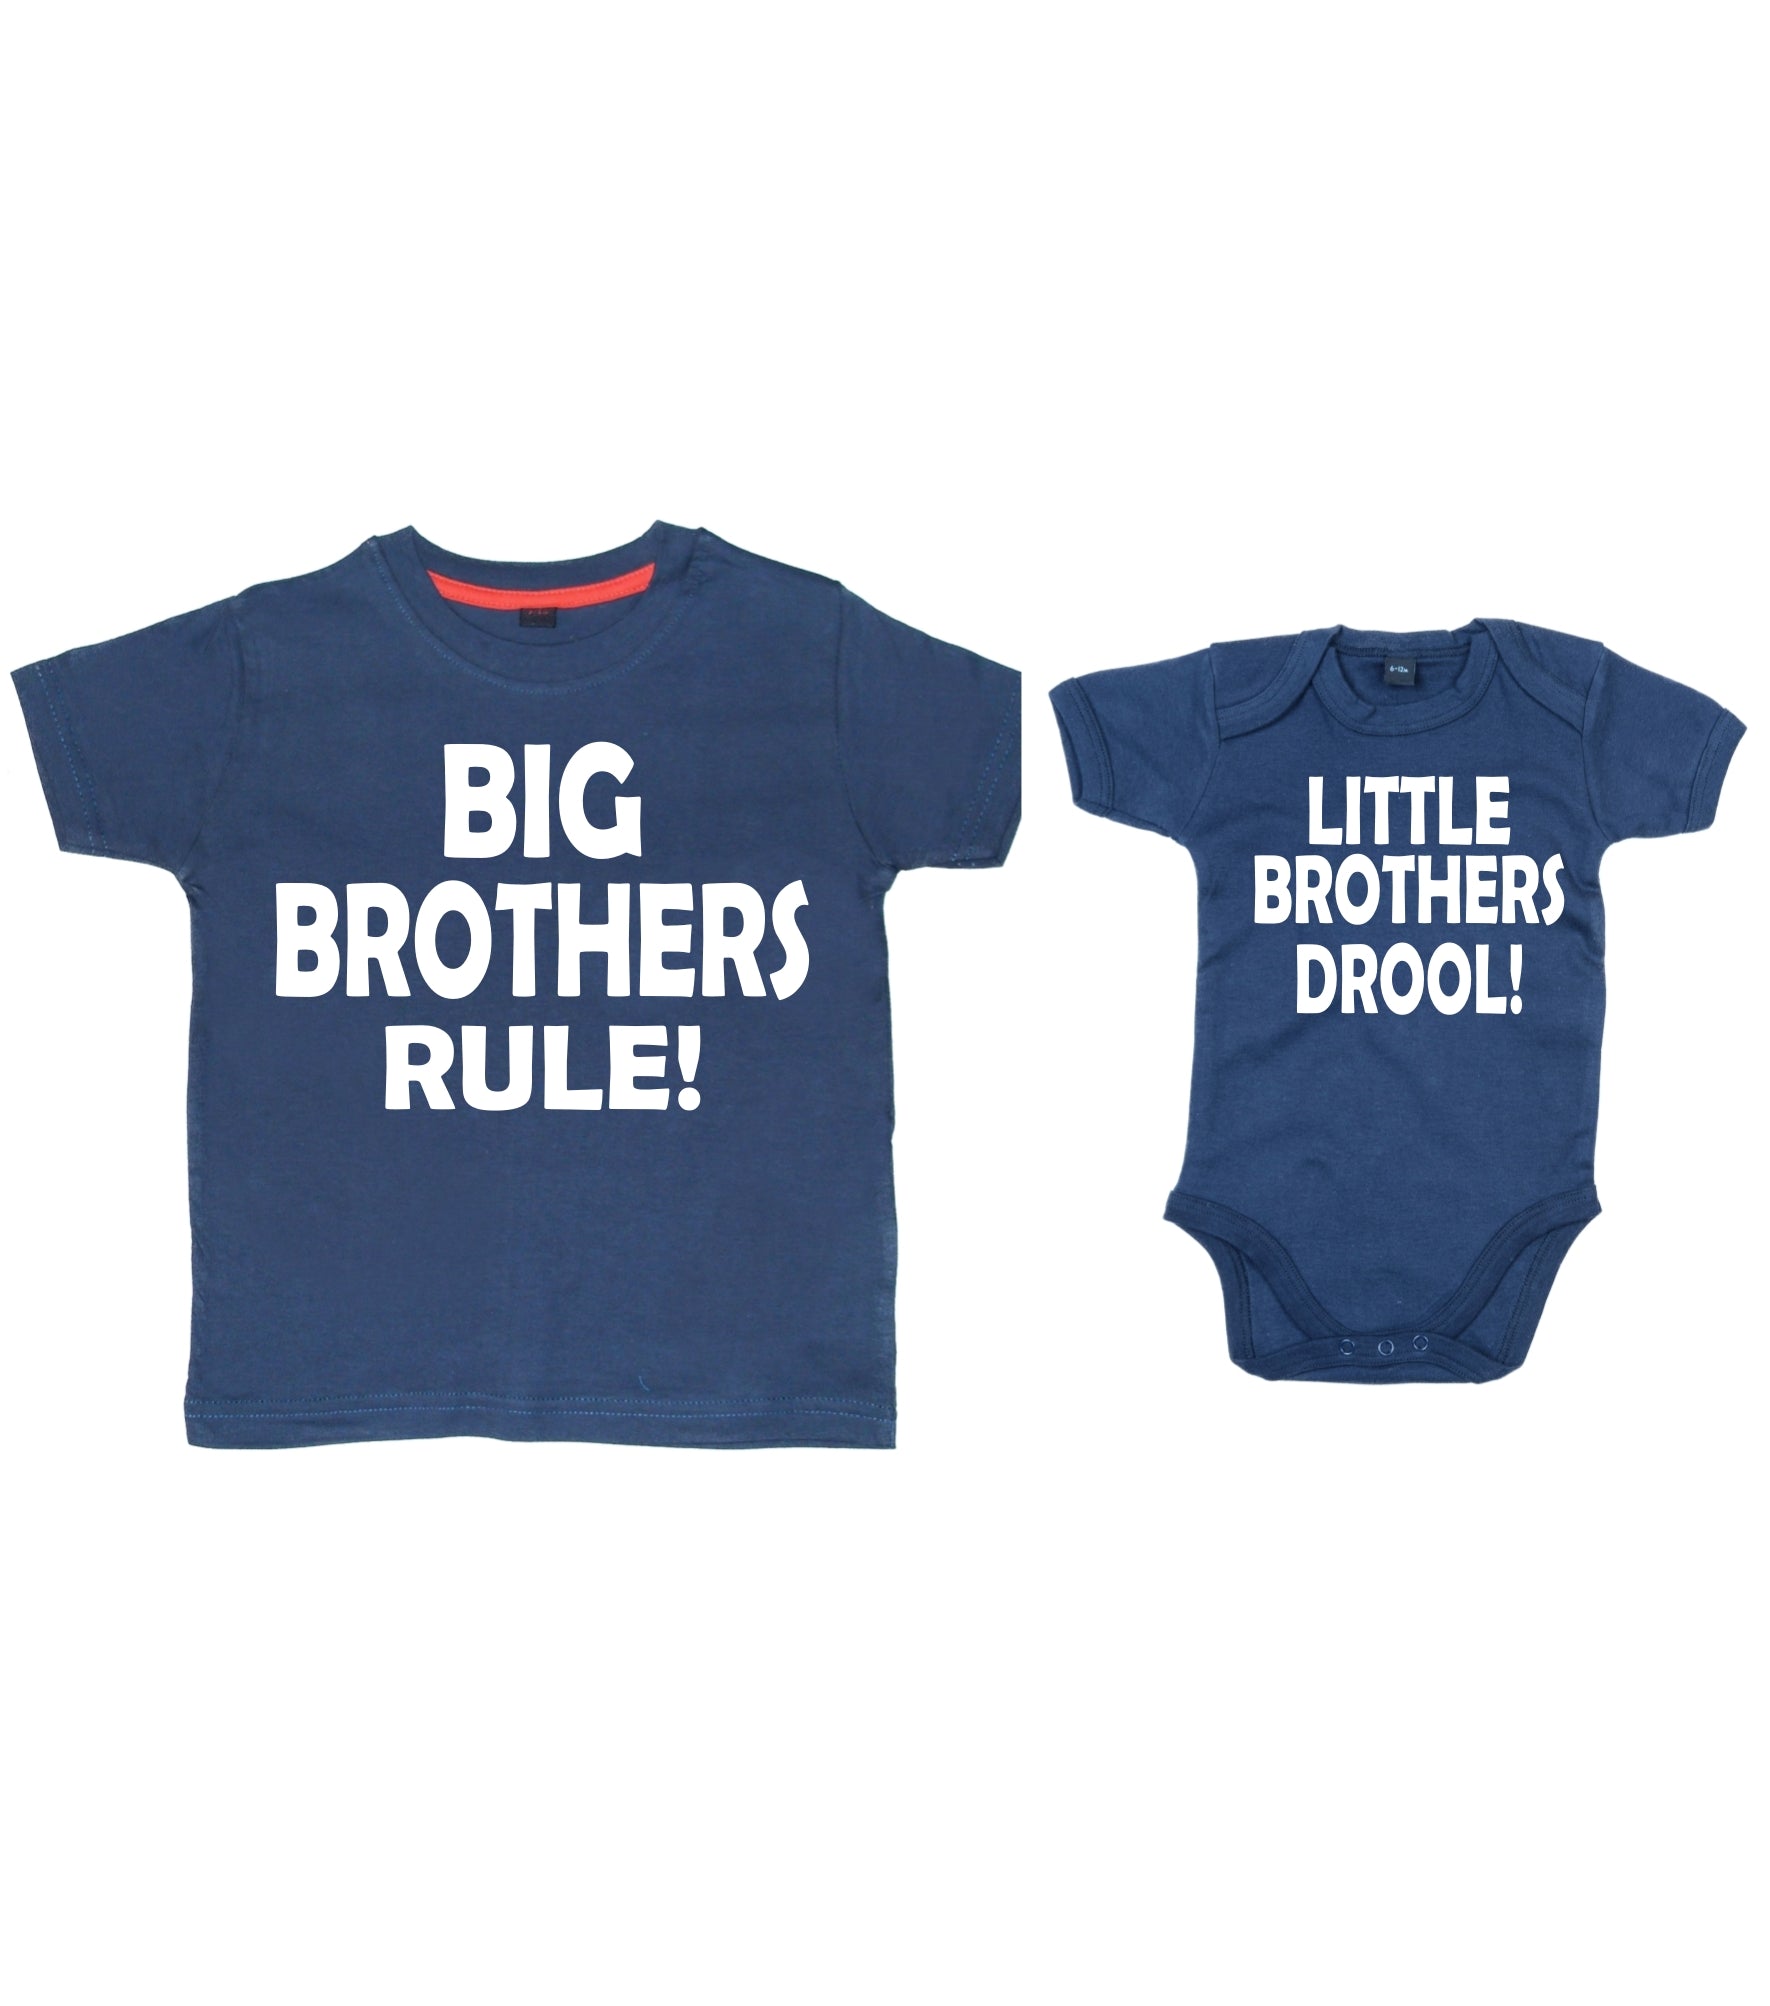 Big Brothers Rule & Little Brothers Drool Navy T-shirt and Bodysuit Set